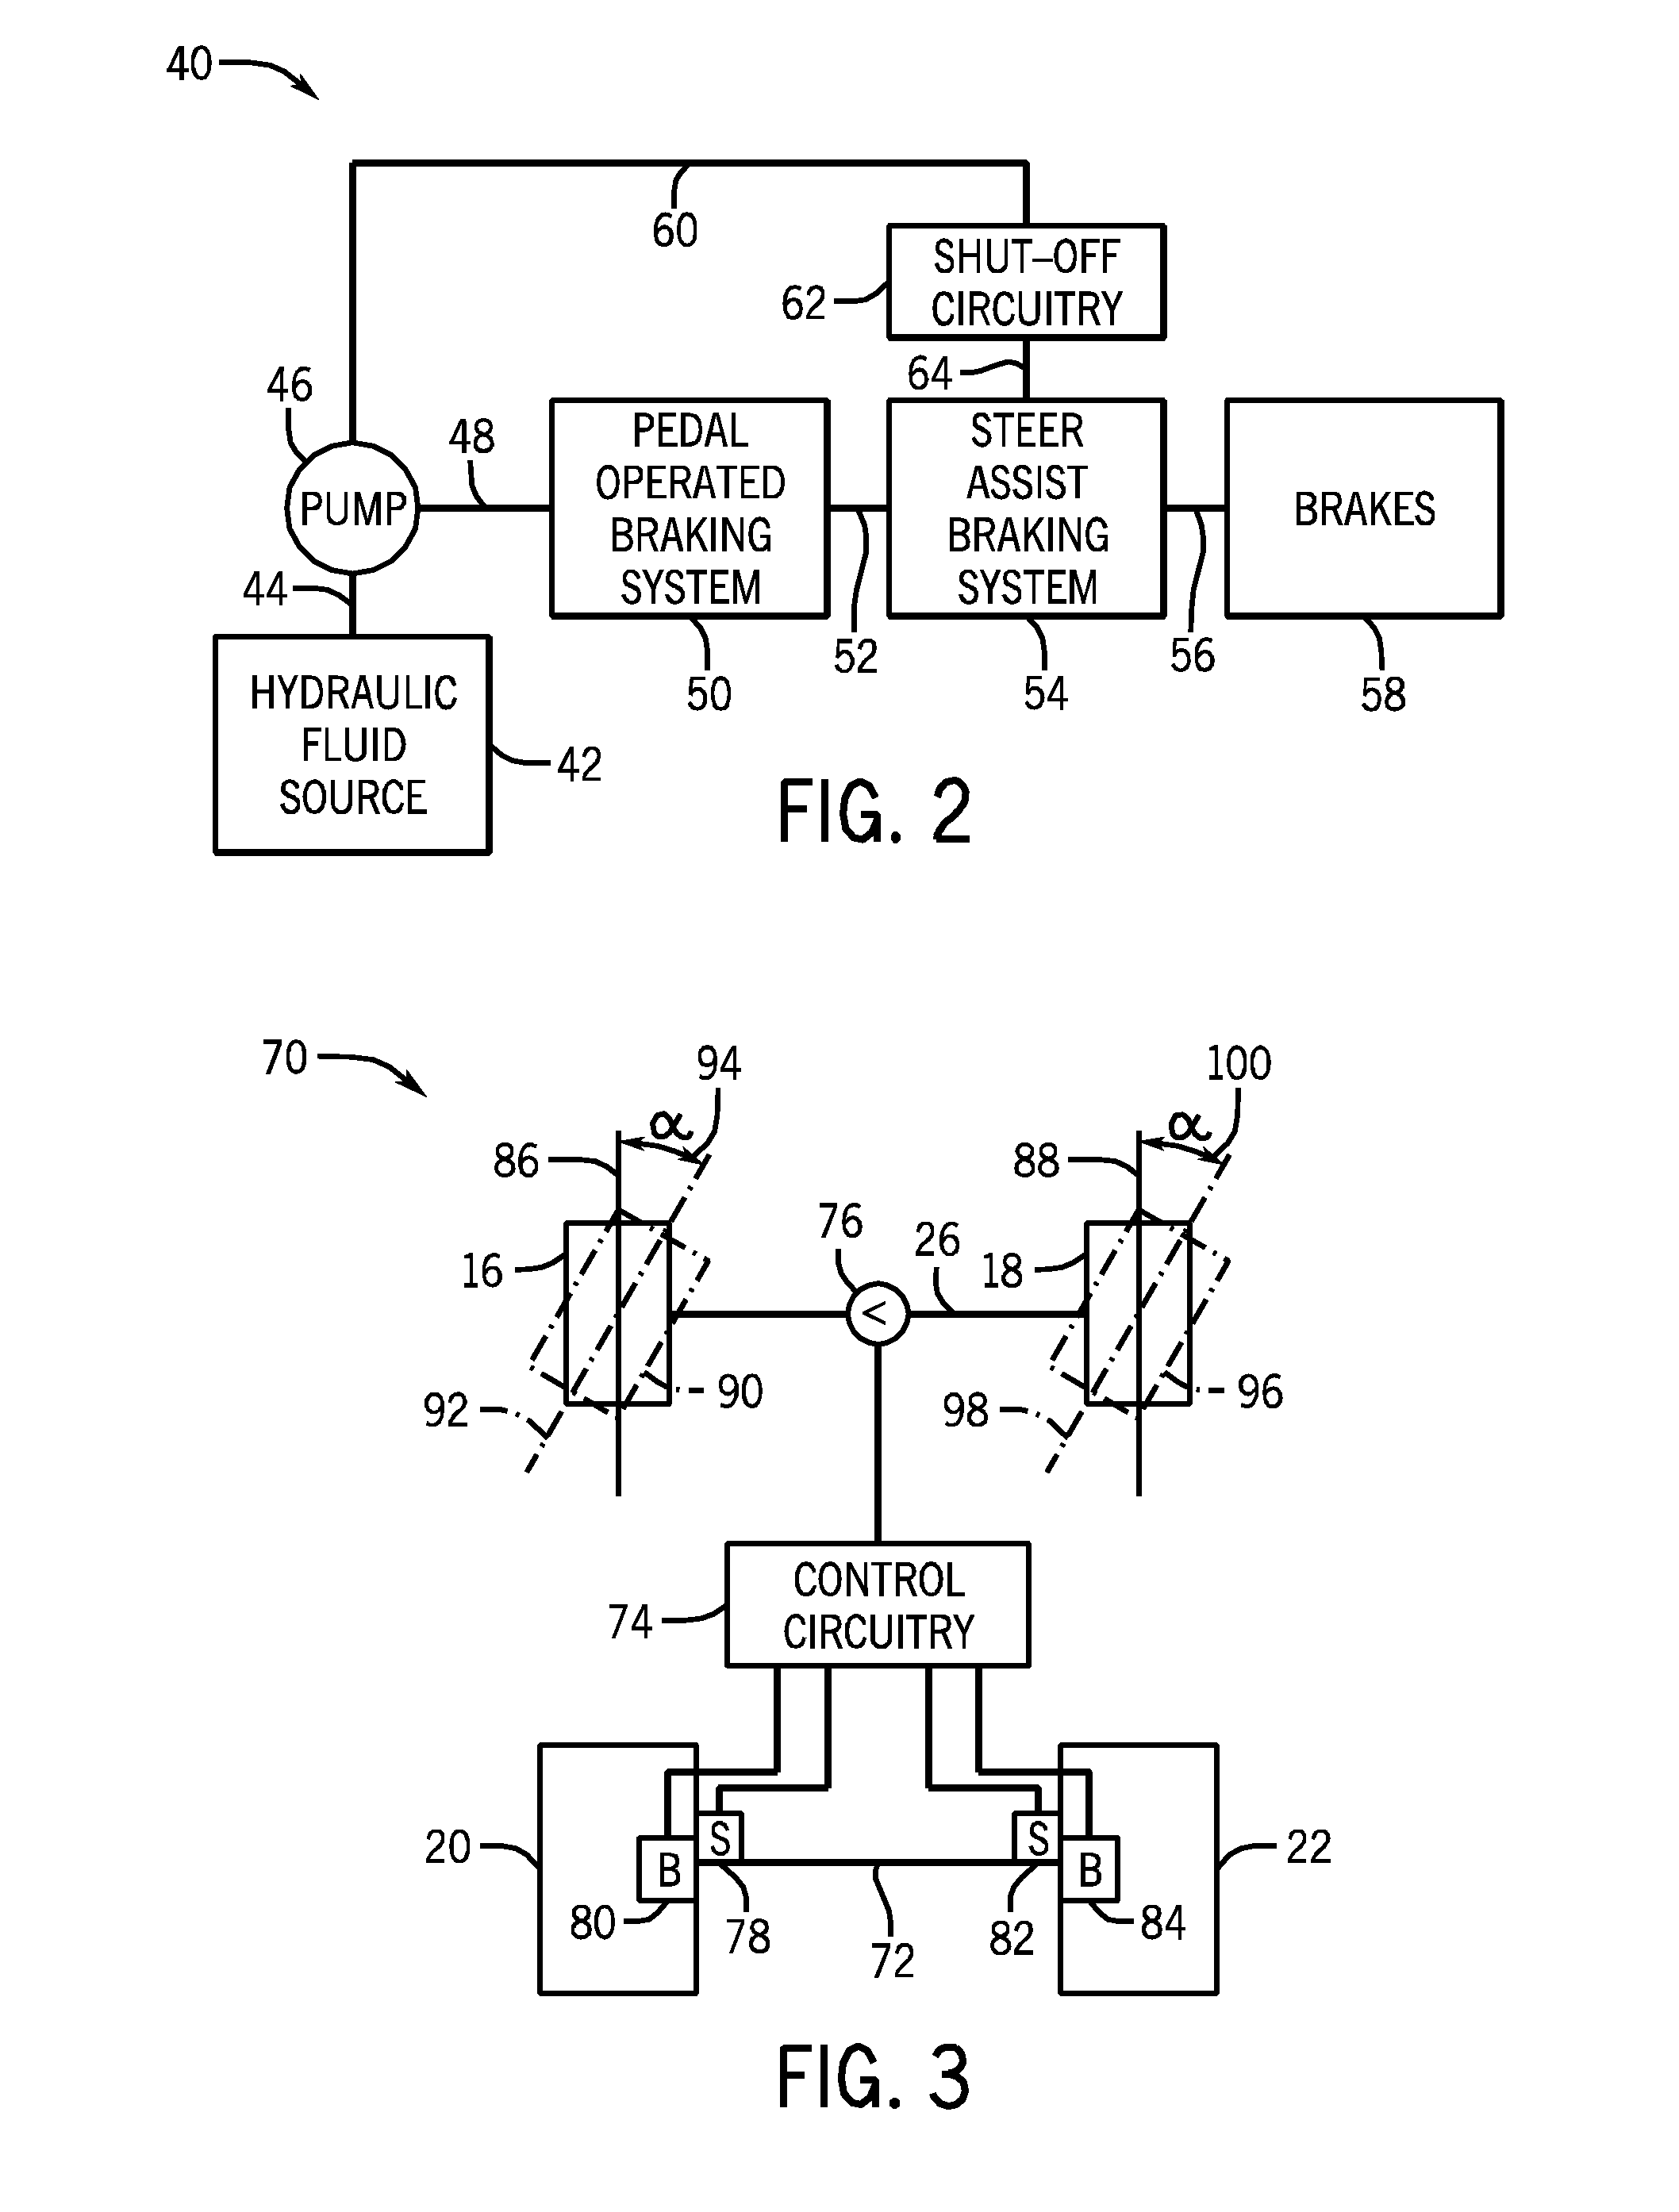 System and method for brake assisted turning